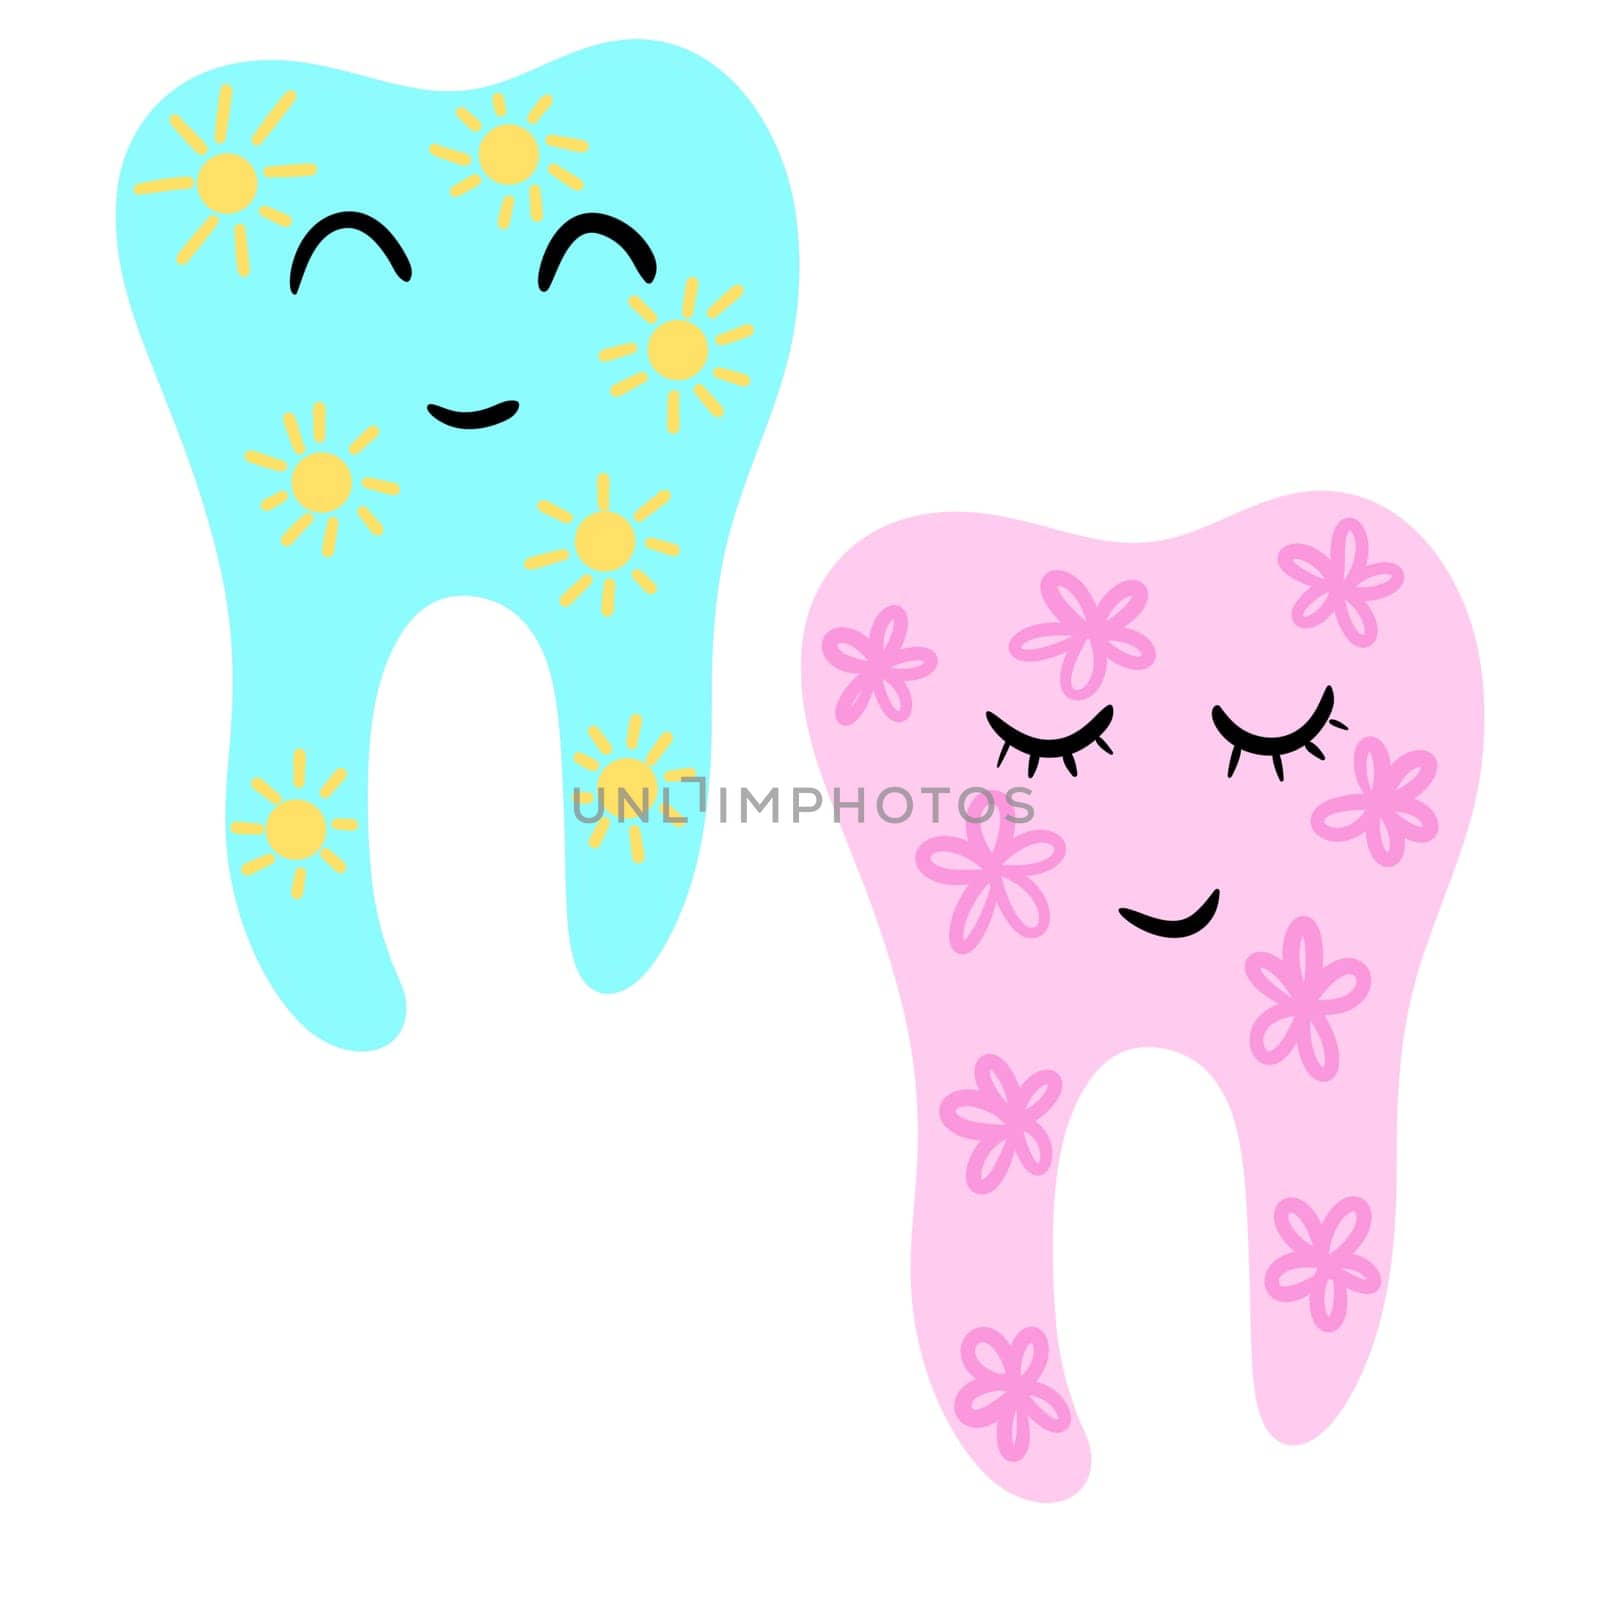 Hand drawn illustration of cute tooth teeth, dentist design for kids children. Funny chacter in pink blue, dental hygiene medicine healthcare, happy cartoon mouth